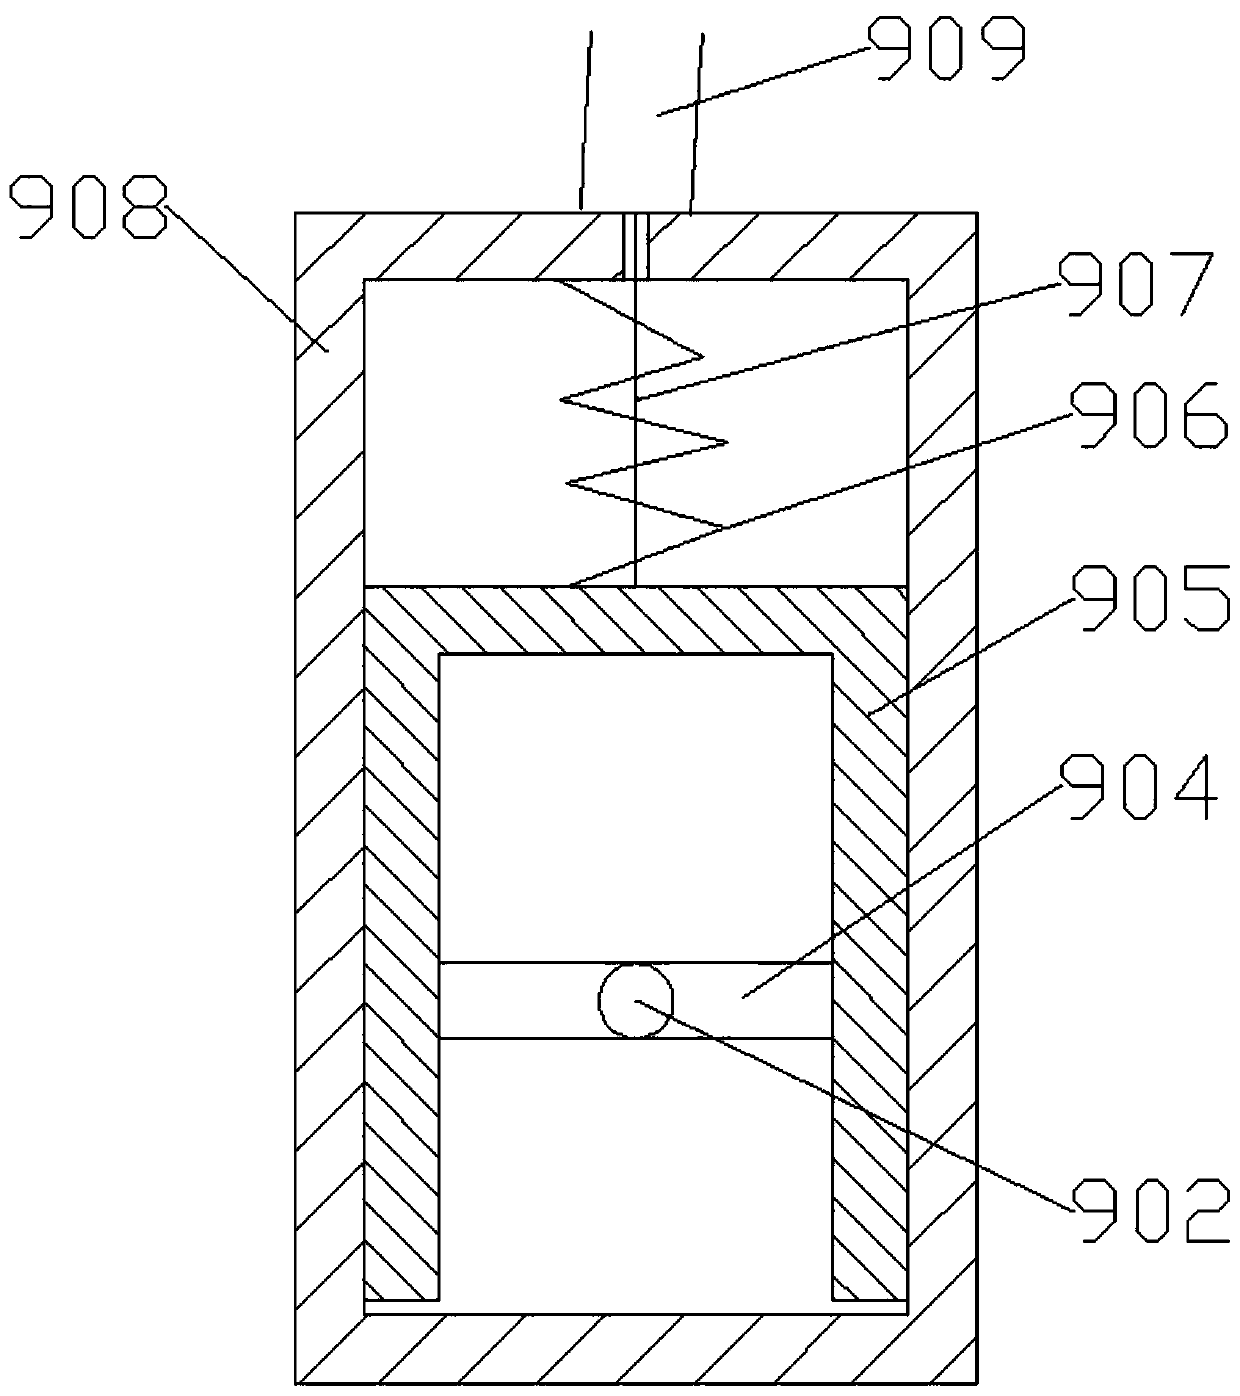 Roller shoes with damping systems and brake devices